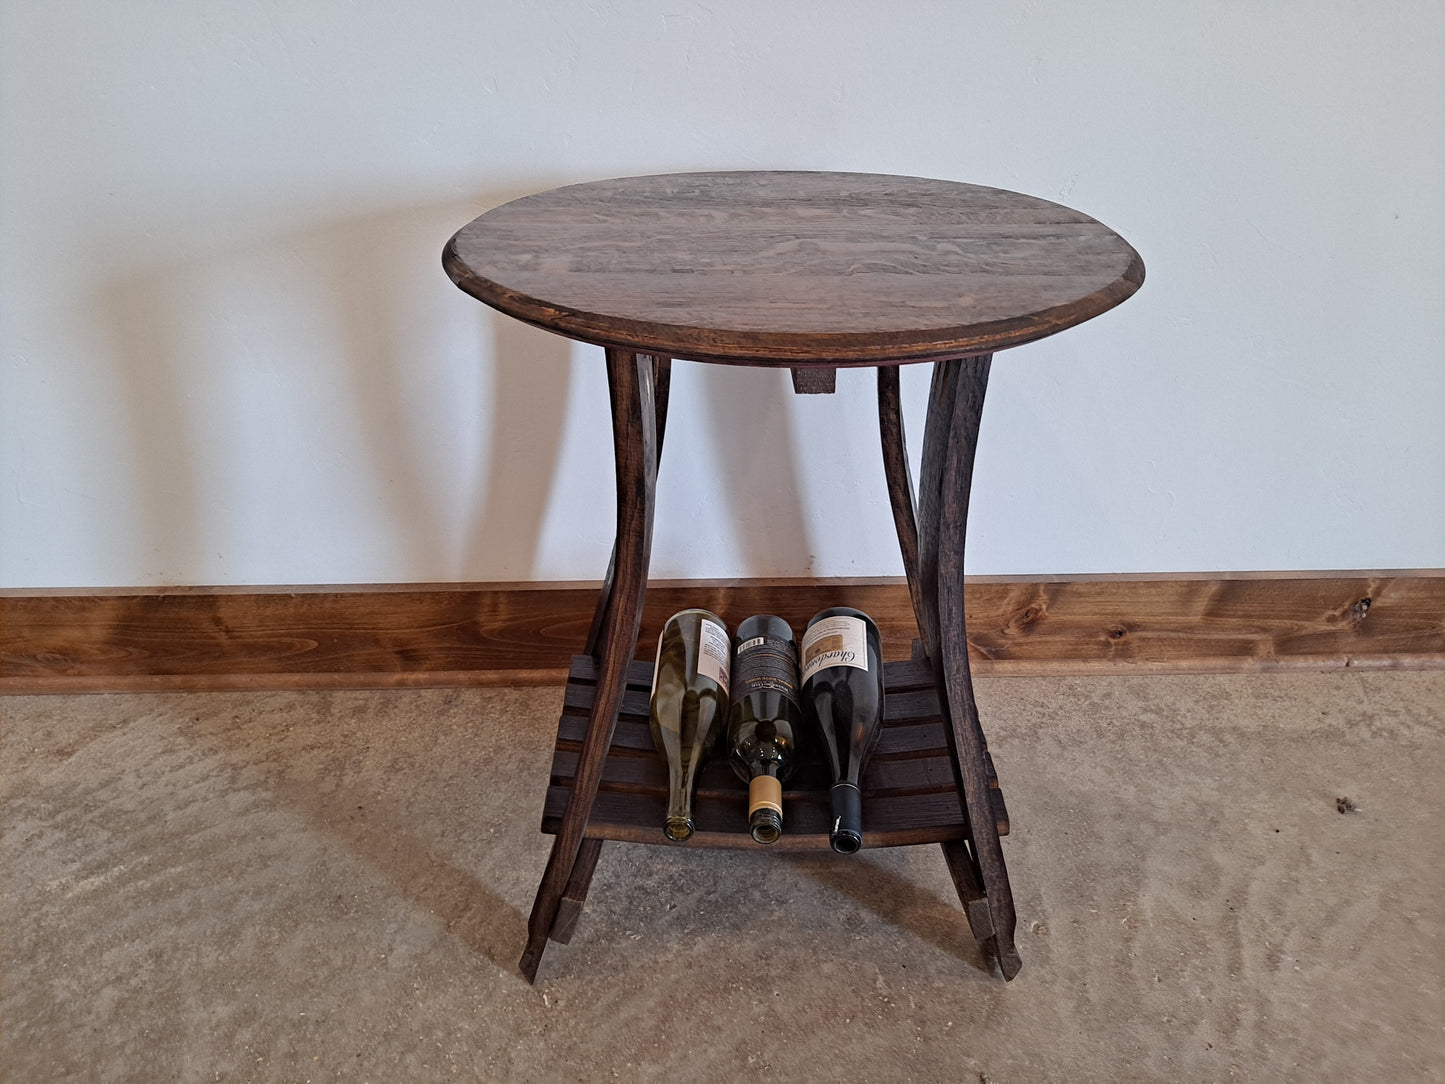 End Table 4-Leg with Shelf